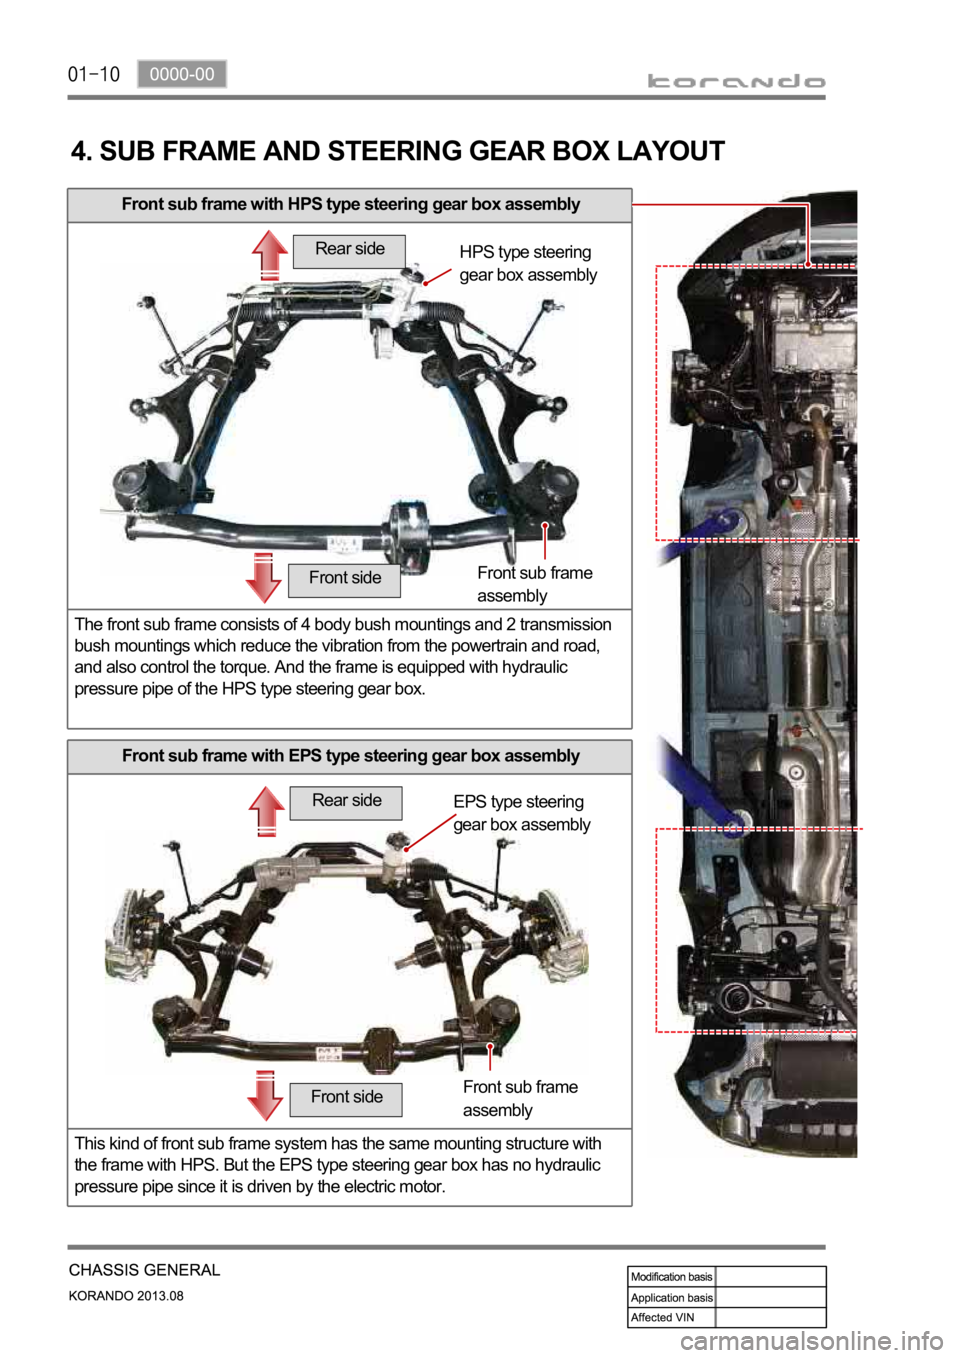 SSANGYONG KORANDO 2013 Owners Guide Front sub frame with HPS type steering gear box assembly
The front sub frame consists of 4 body bush mountings and 2 transmission 
bush mountings which reduce the vibration from the powertrain and roa